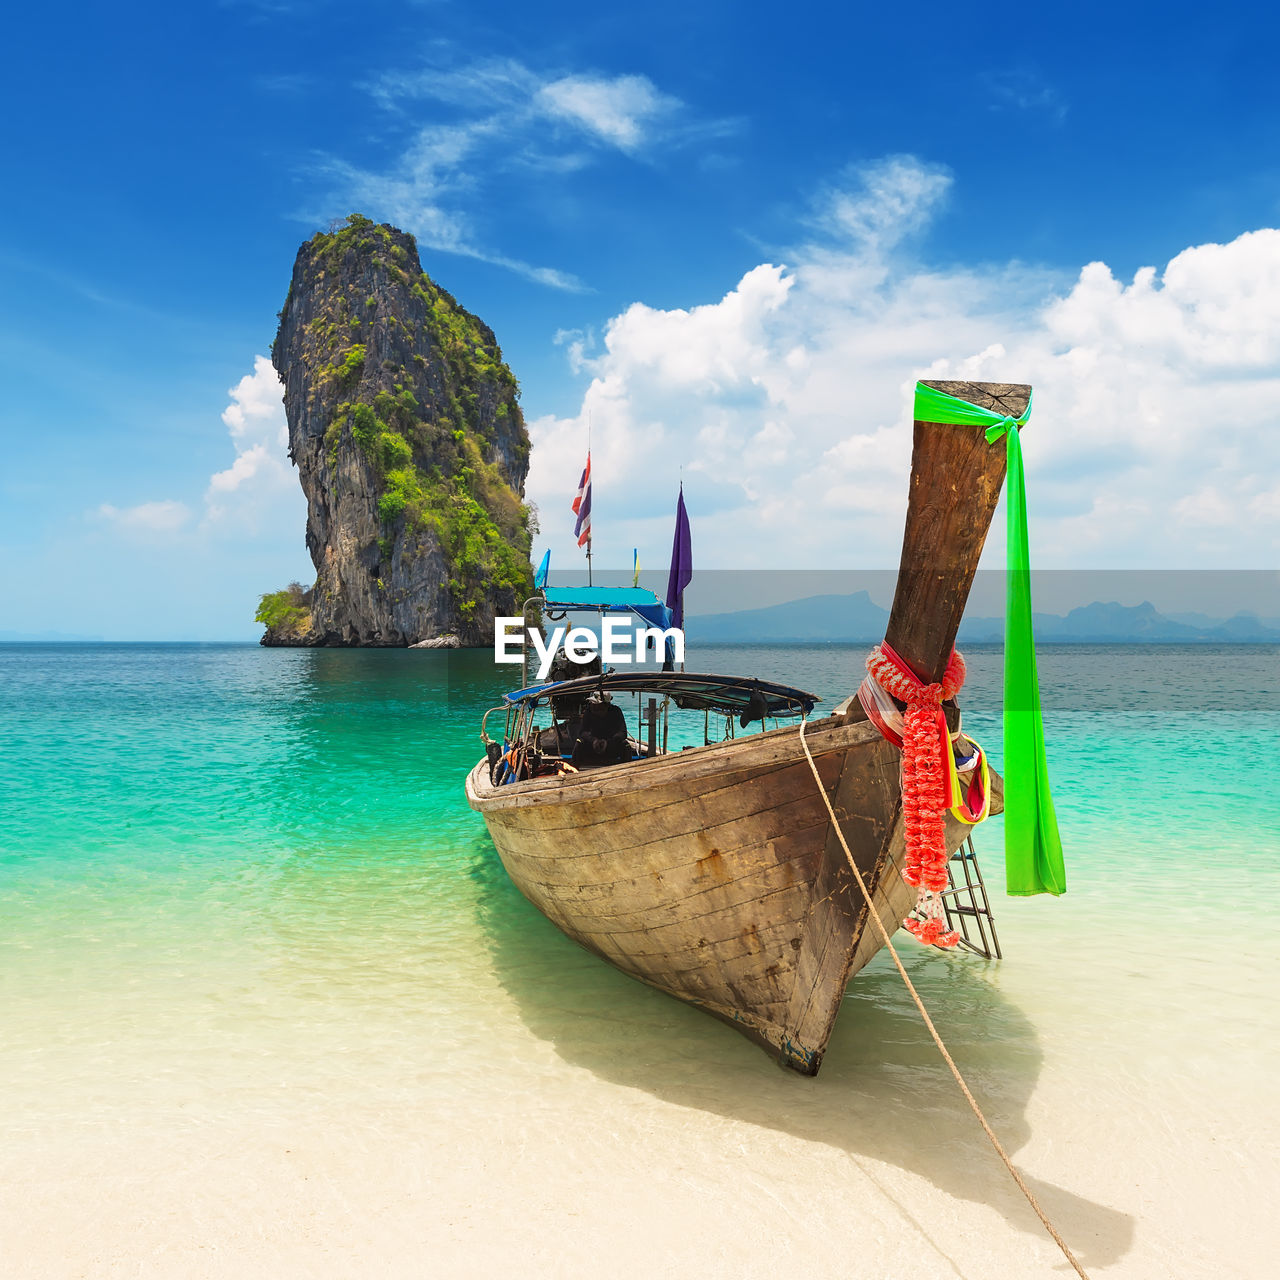 Thai traditional wooden longtail boat and sand beach at koh poda in krabi province, thailand.